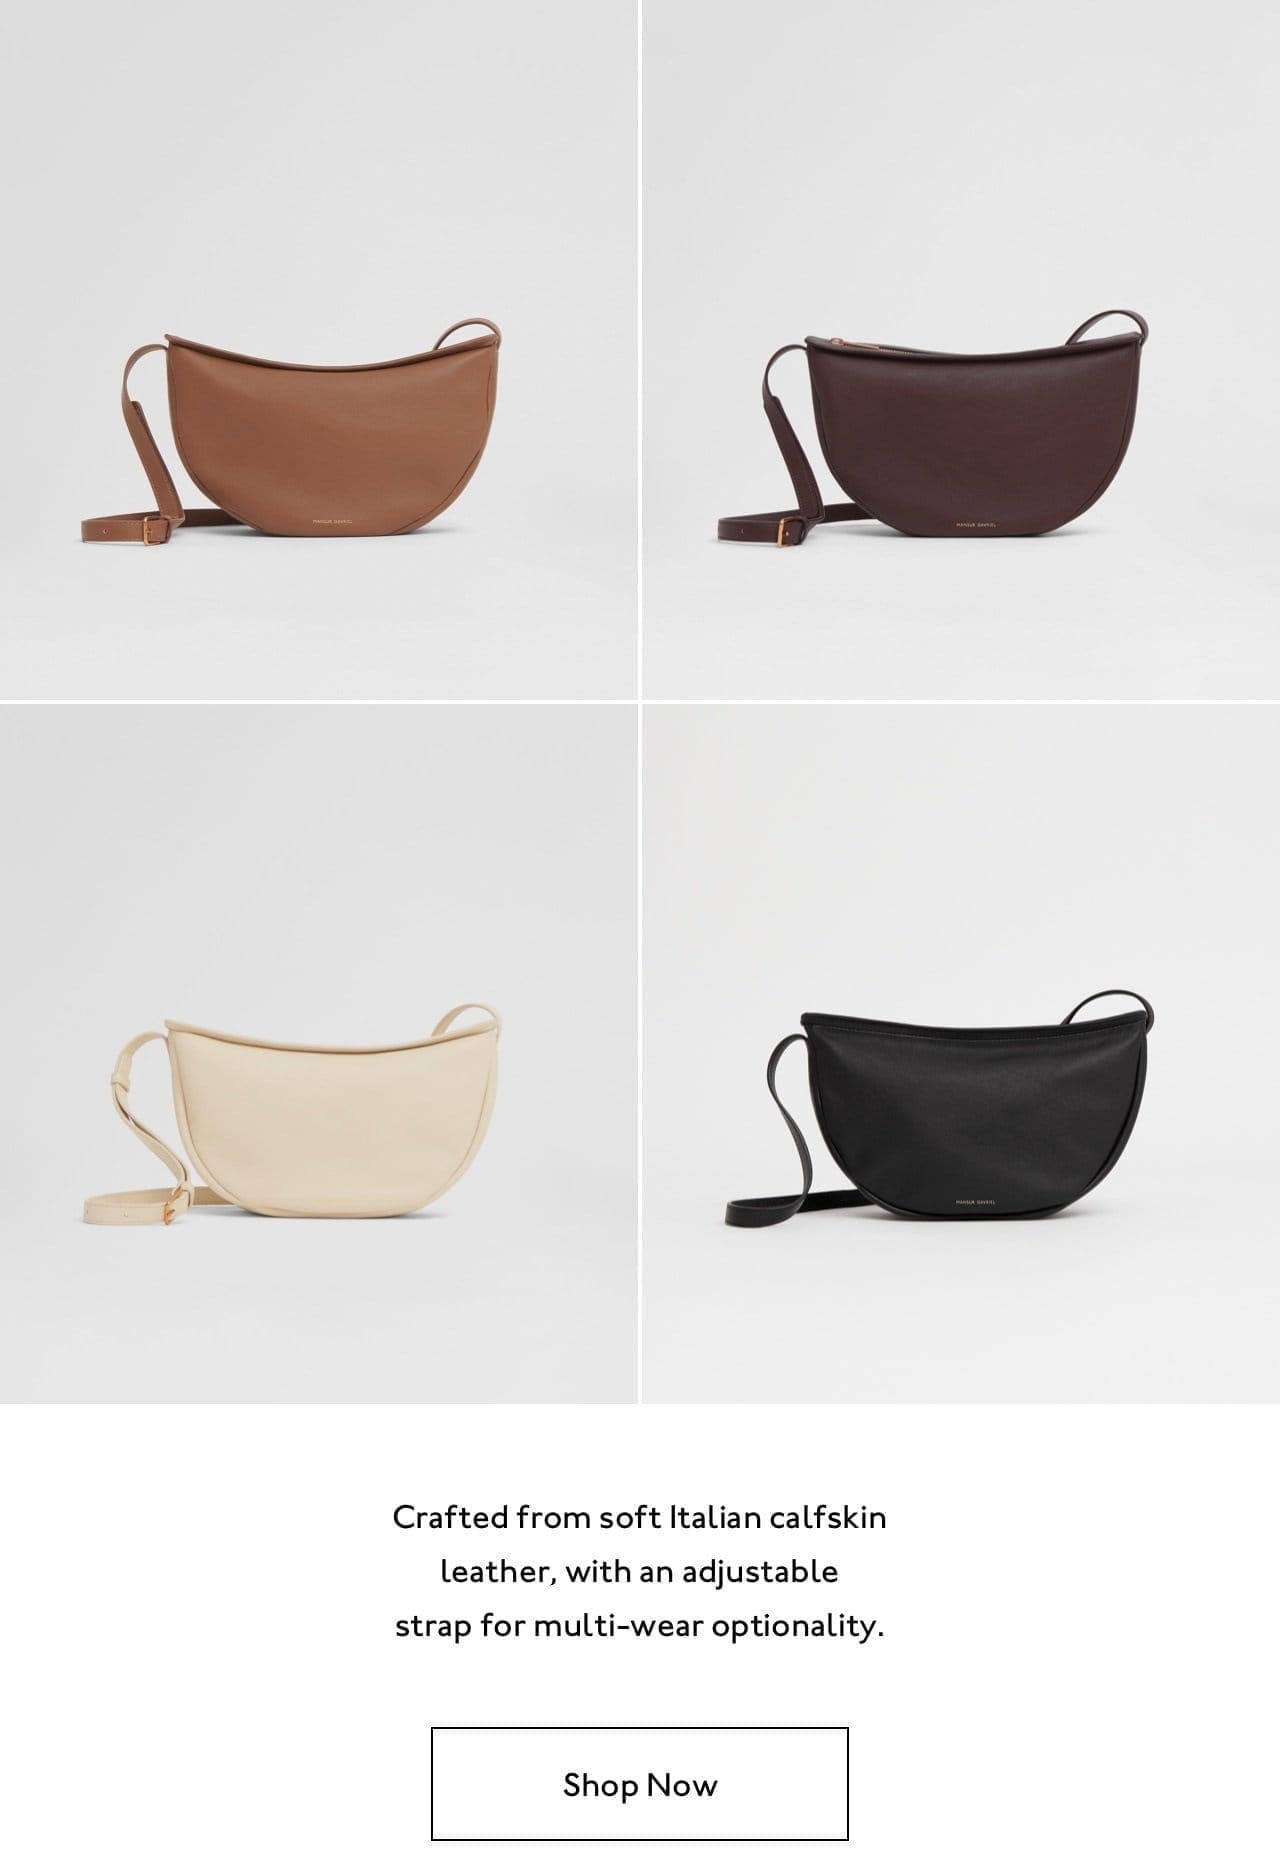 Crafted from soft Italian calfskin leahter, with an adjustable strap for multi-wear optionality.